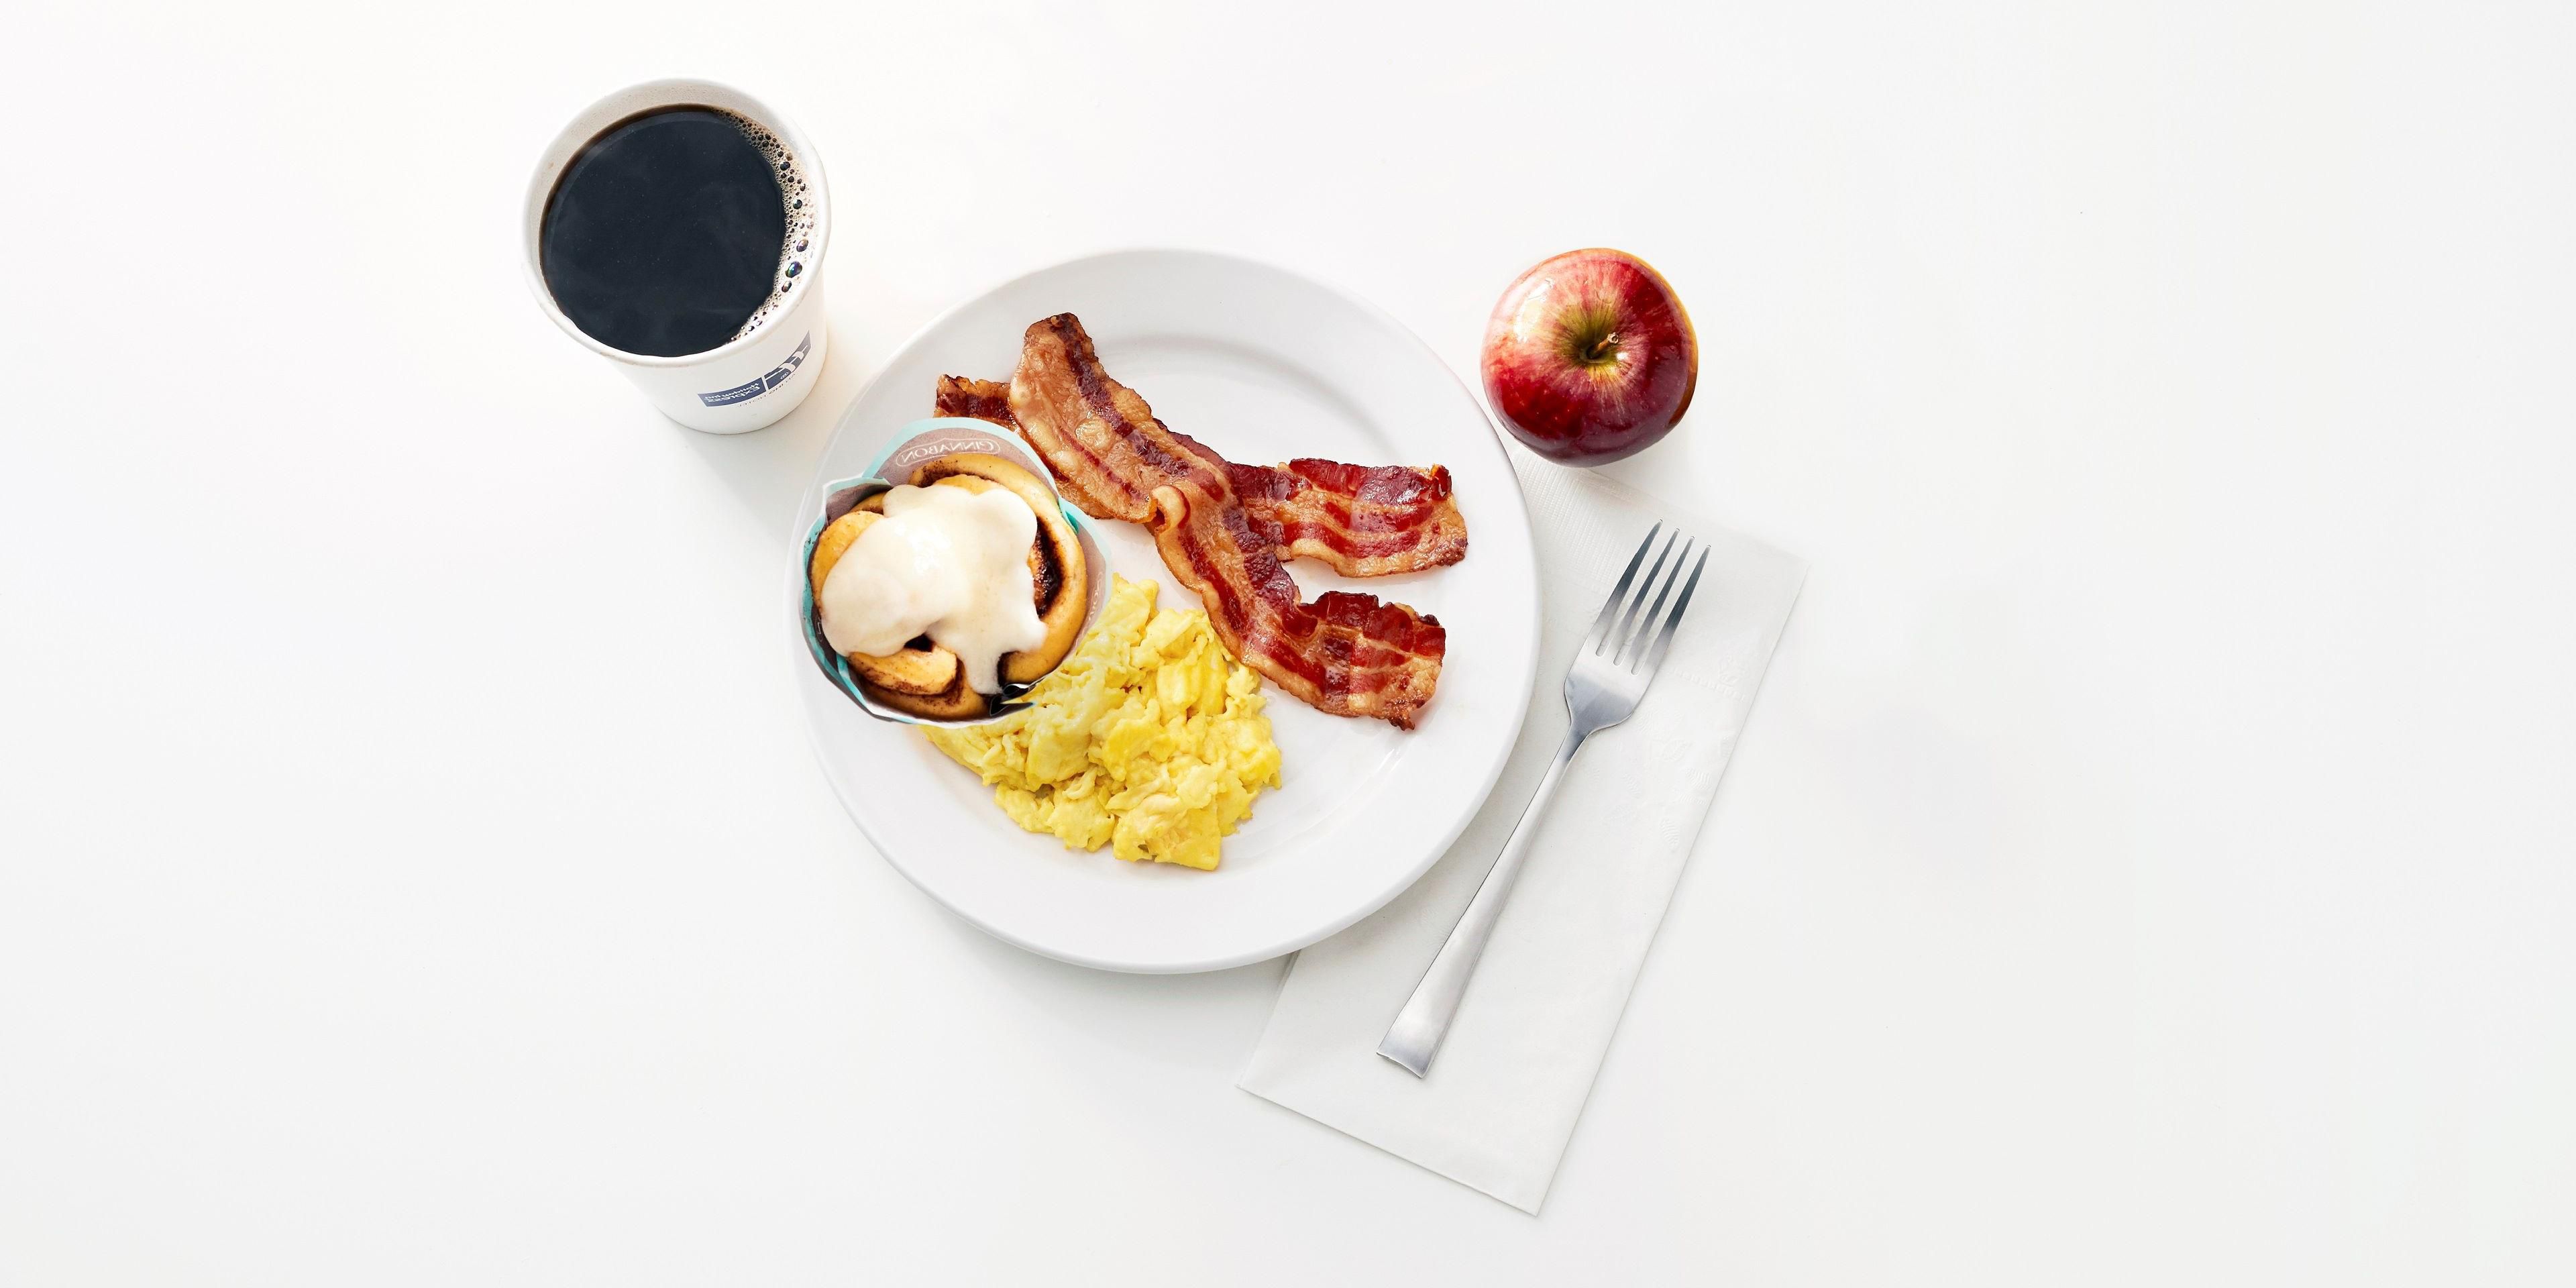 Kick start your day with our free Express Start Breakfast, with grab ‘n’ go options and favorites such as eggs and bacon, hot pancakes, our signature cinnamon rolls and fresh coffee. Offered from 6:00 AM to 9:30 AM.